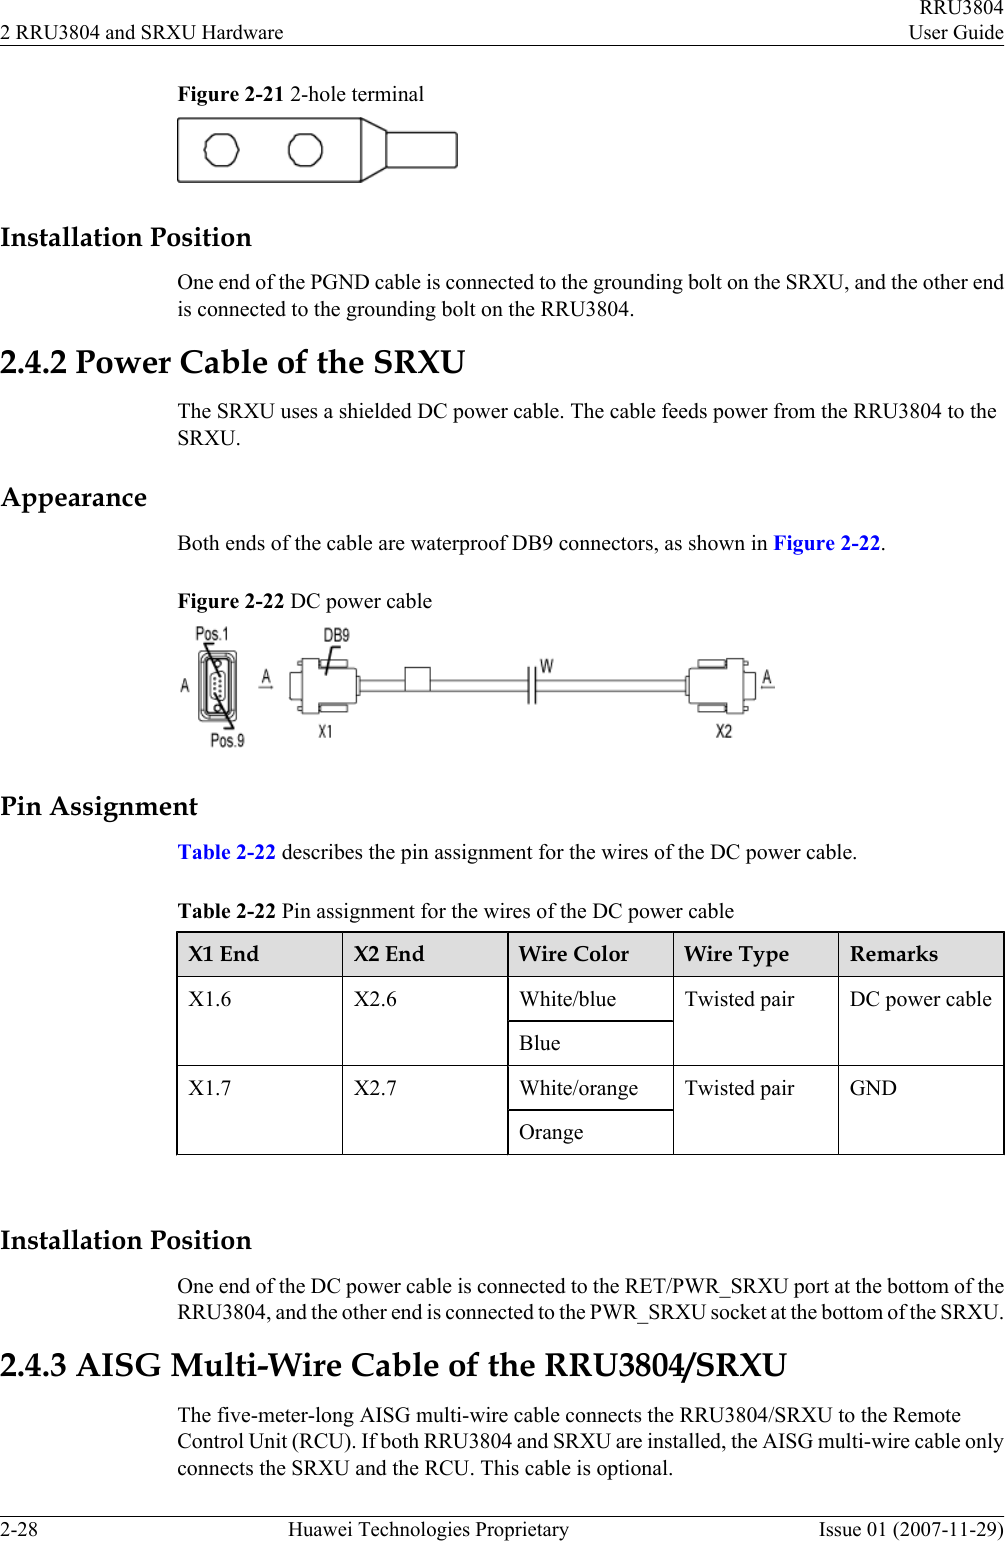 Figure 2-21 2-hole terminalInstallation PositionOne end of the PGND cable is connected to the grounding bolt on the SRXU, and the other endis connected to the grounding bolt on the RRU3804.2.4.2 Power Cable of the SRXUThe SRXU uses a shielded DC power cable. The cable feeds power from the RRU3804 to theSRXU.AppearanceBoth ends of the cable are waterproof DB9 connectors, as shown in Figure 2-22.Figure 2-22 DC power cablePin AssignmentTable 2-22 describes the pin assignment for the wires of the DC power cable.Table 2-22 Pin assignment for the wires of the DC power cableX1 End X2 End Wire Color Wire Type RemarksX1.6 X2.6 White/blue Twisted pair DC power cableBlueX1.7 X2.7 White/orange Twisted pair GNDOrange Installation PositionOne end of the DC power cable is connected to the RET/PWR_SRXU port at the bottom of theRRU3804, and the other end is connected to the PWR_SRXU socket at the bottom of the SRXU.2.4.3 AISG Multi-Wire Cable of the RRU3804/SRXUThe five-meter-long AISG multi-wire cable connects the RRU3804/SRXU to the RemoteControl Unit (RCU). If both RRU3804 and SRXU are installed, the AISG multi-wire cable onlyconnects the SRXU and the RCU. This cable is optional.2 RRU3804 and SRXU HardwareRRU3804User Guide2-28 Huawei Technologies Proprietary Issue 01 (2007-11-29)